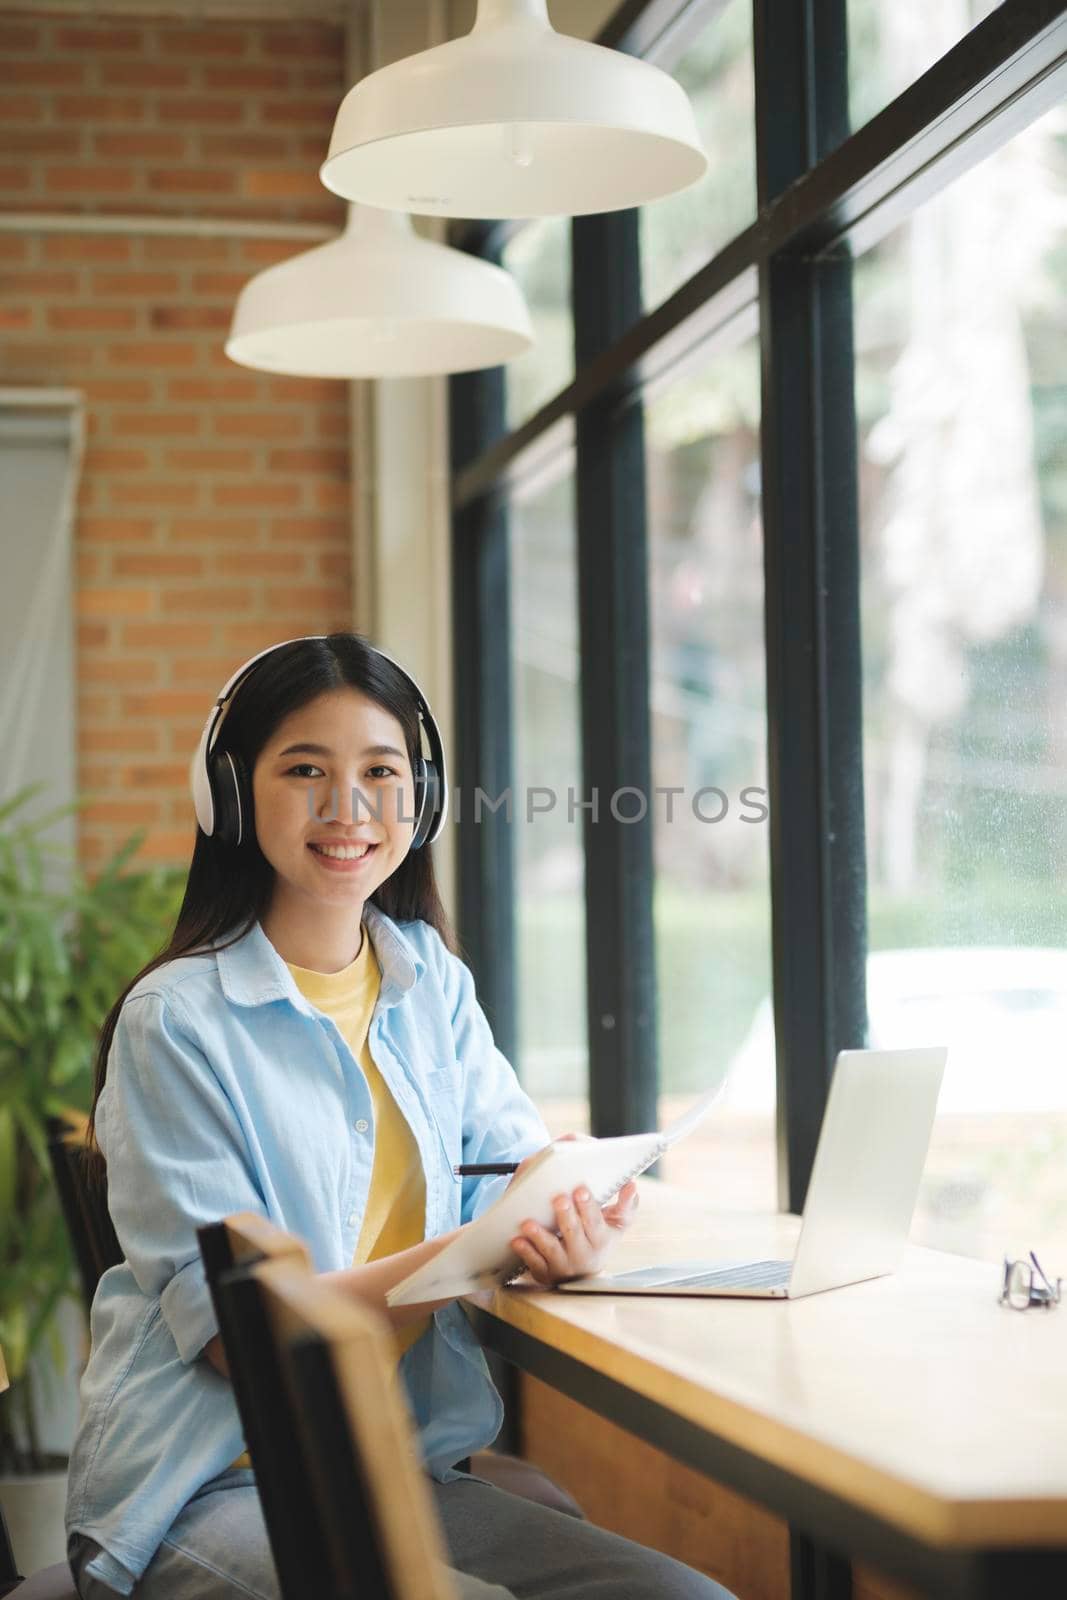 Happy young woman learning and studying online using laptop while sitting at table and looking at camera. Student learning online using laptop and smiling at the camera holding paperwork and sitting at table near window. Learning concept.